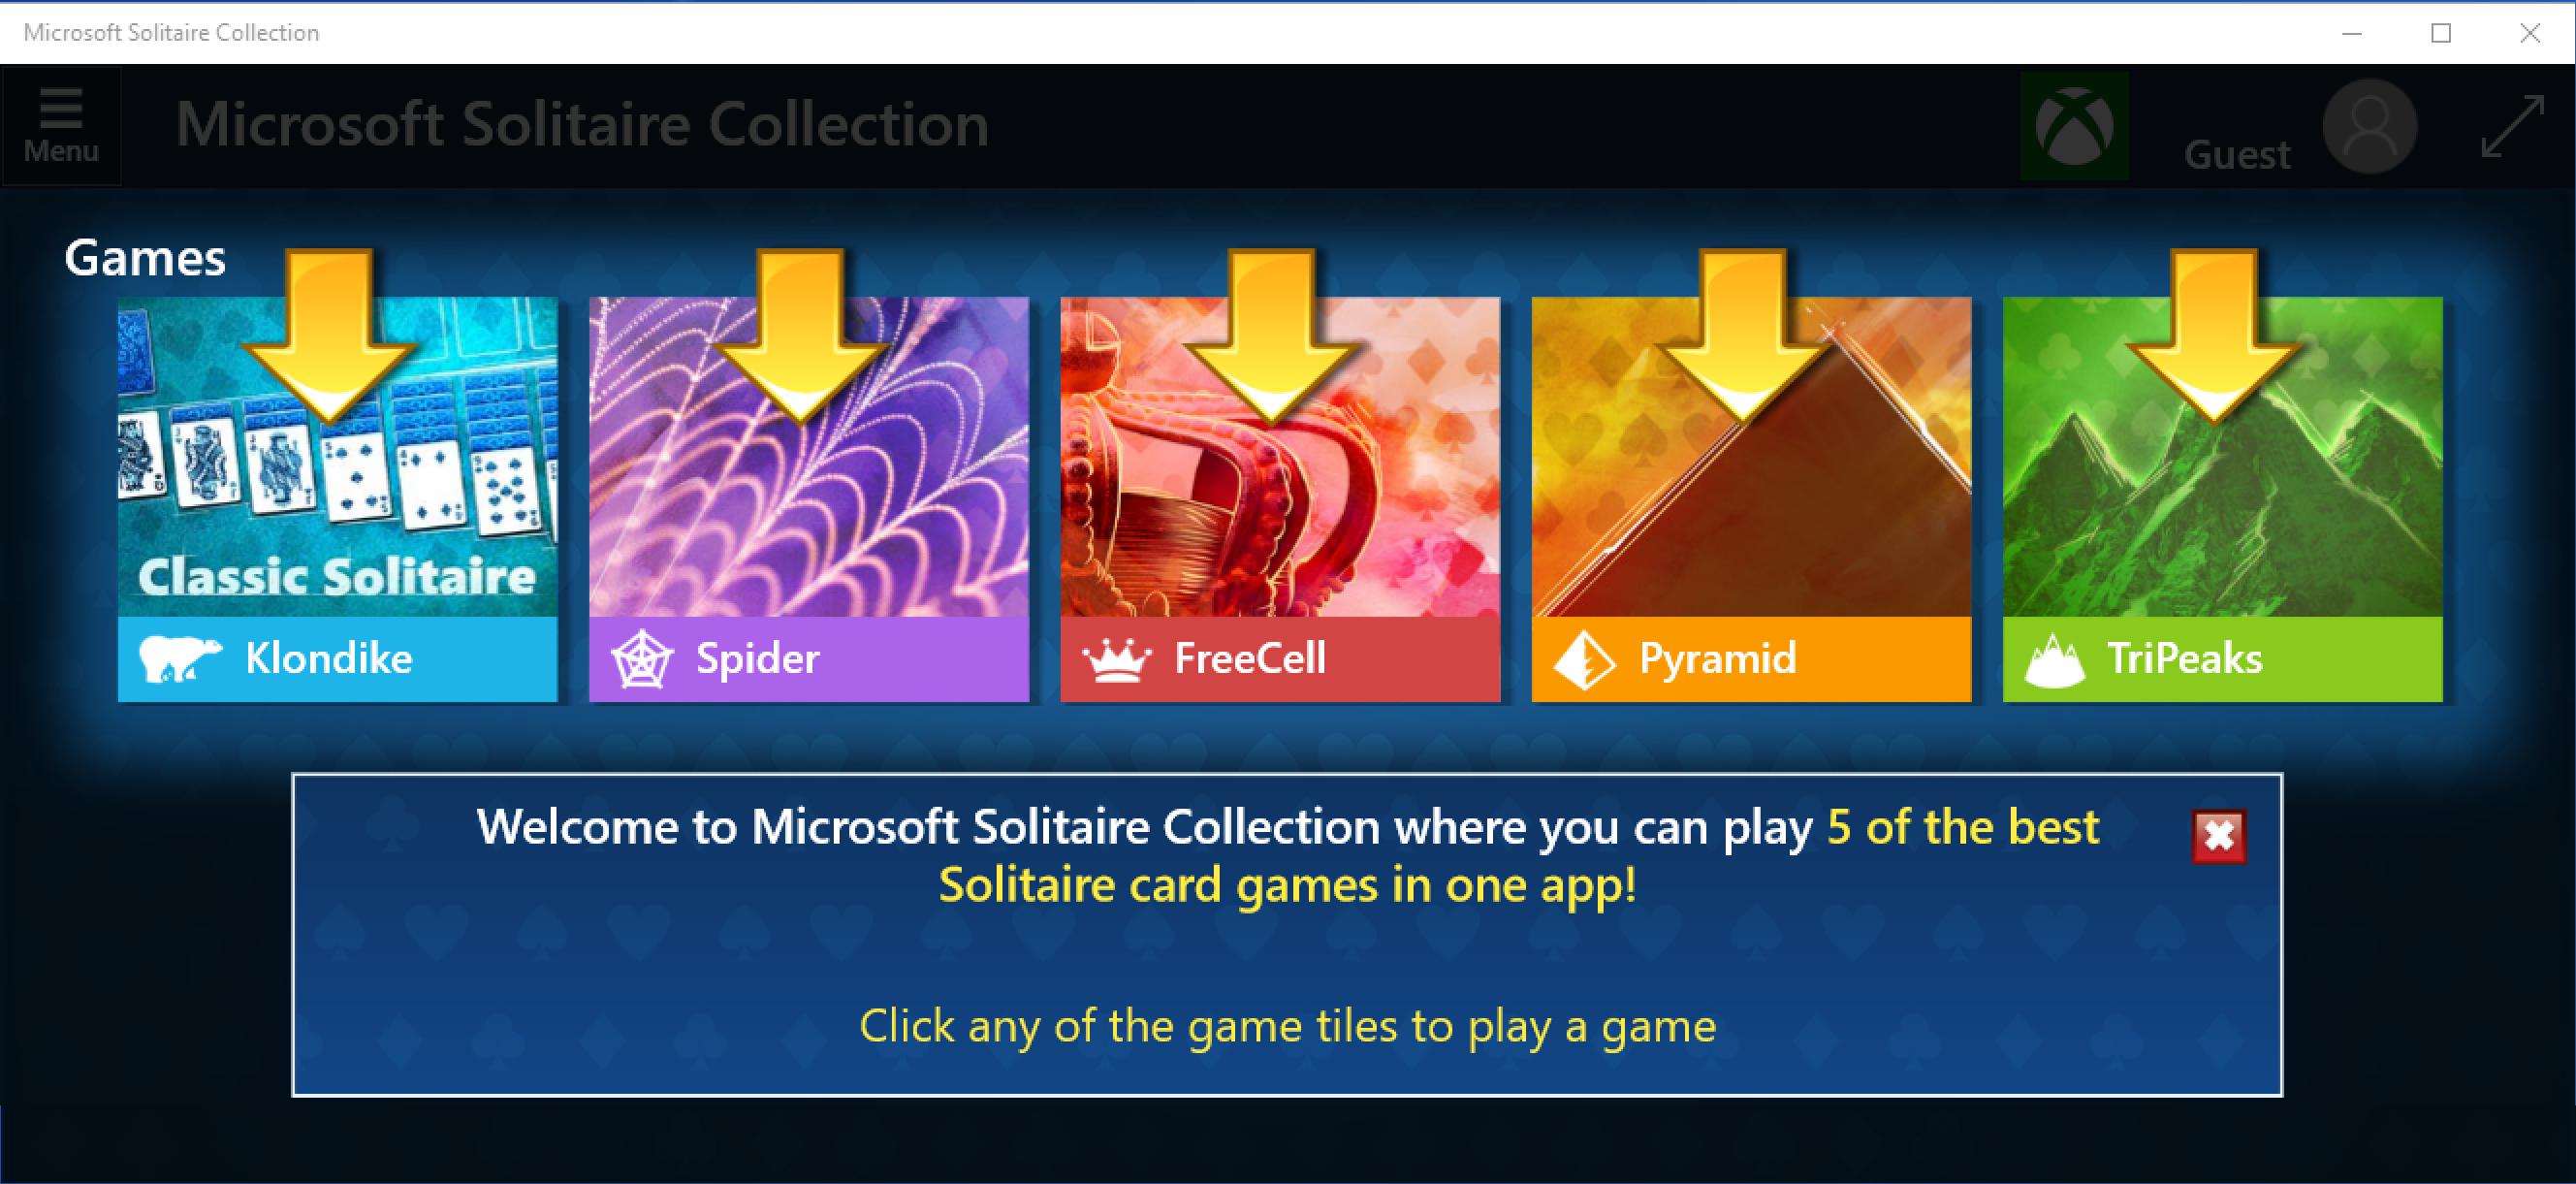 microsoft solitaire collection win10 main choices: klondike, pyramid, tripeak, spider, freecell